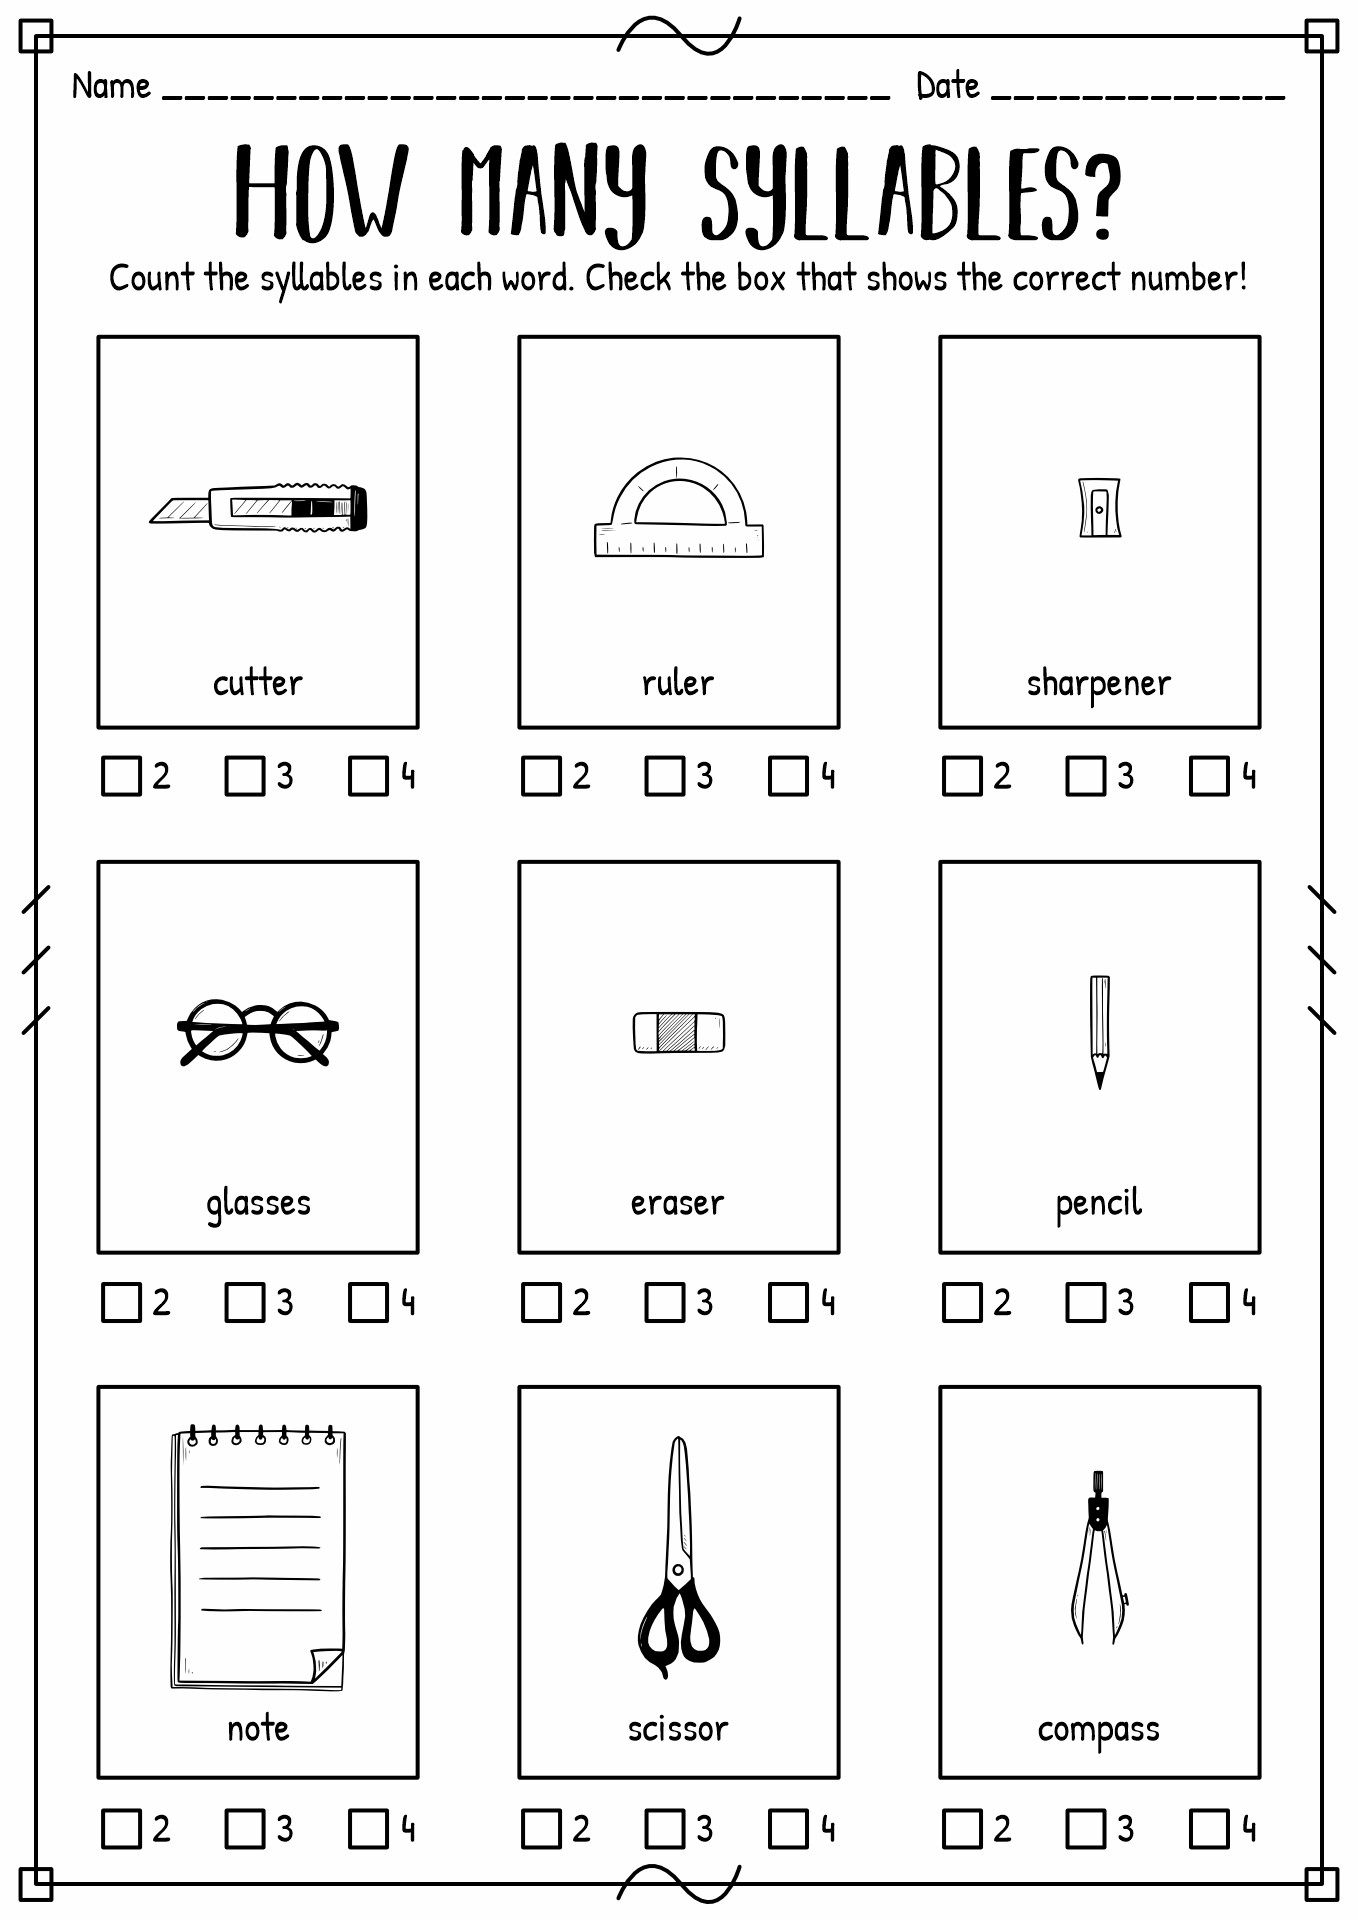 syllables-worksheet-for-1st-grade